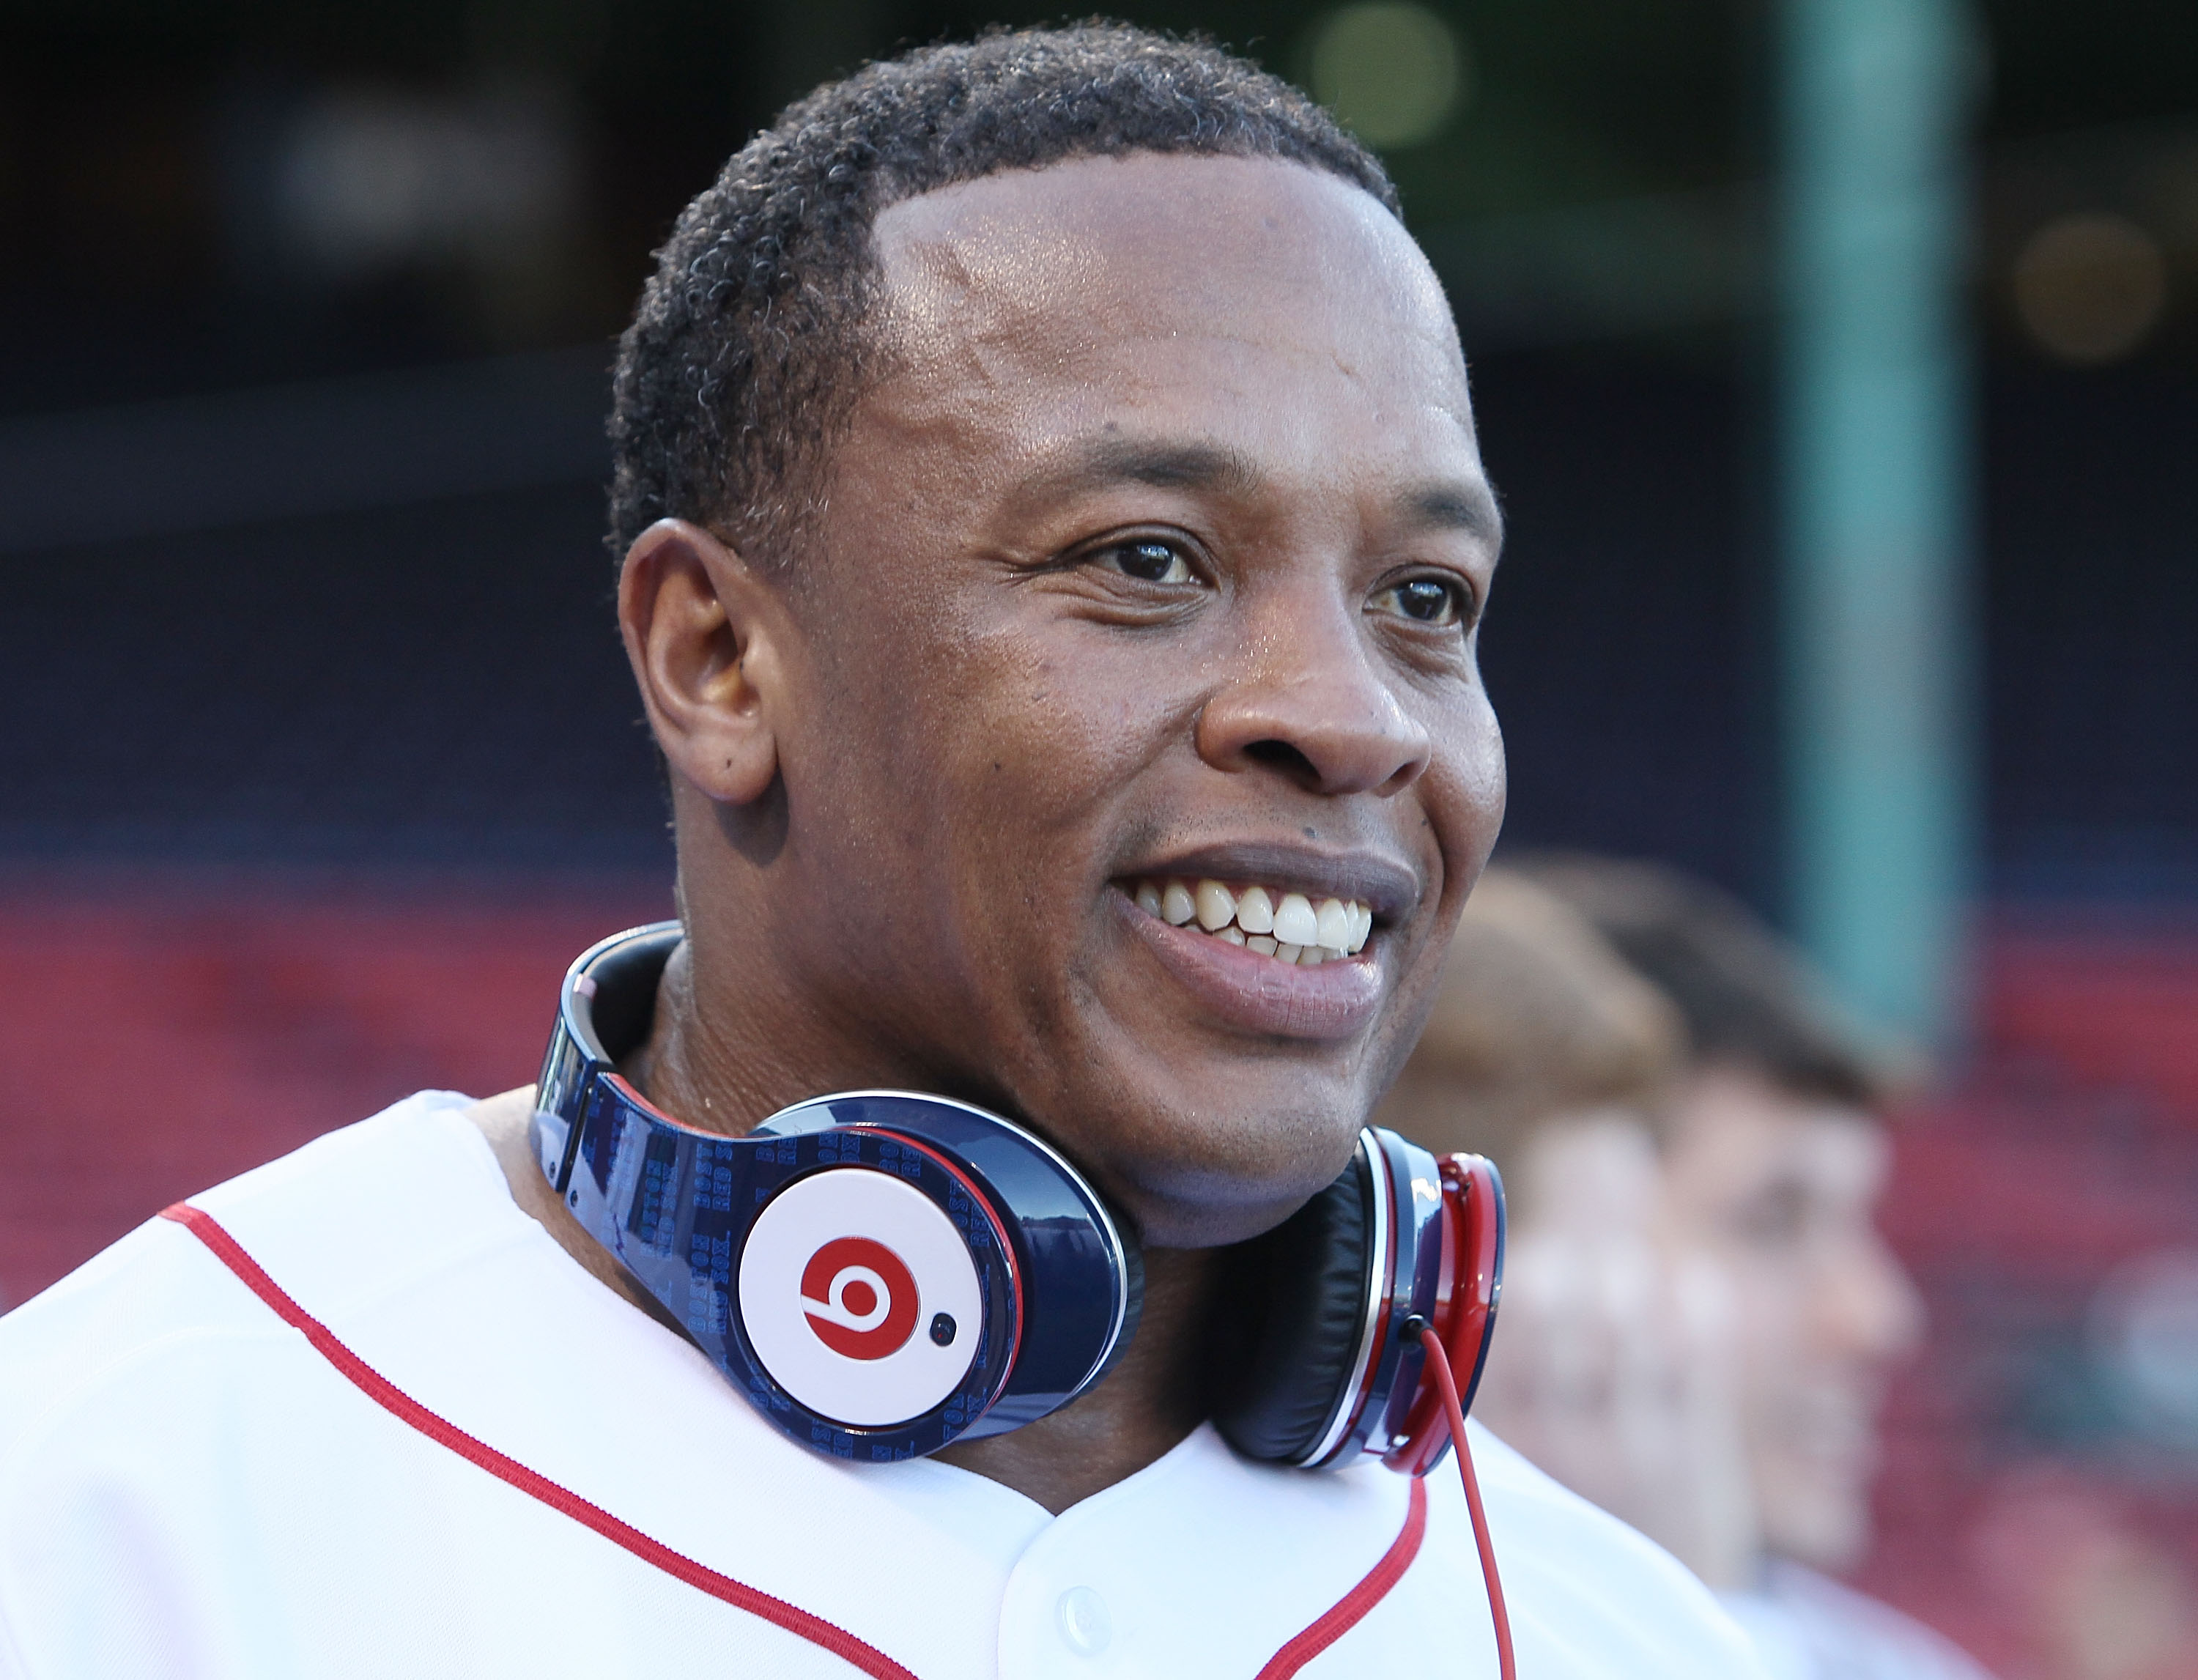 Producer and musician Dr. Dre is on the field before the Boston Red Sox take on the the New York Yankees on April 4, 2010. (Elsa—Getty Images)